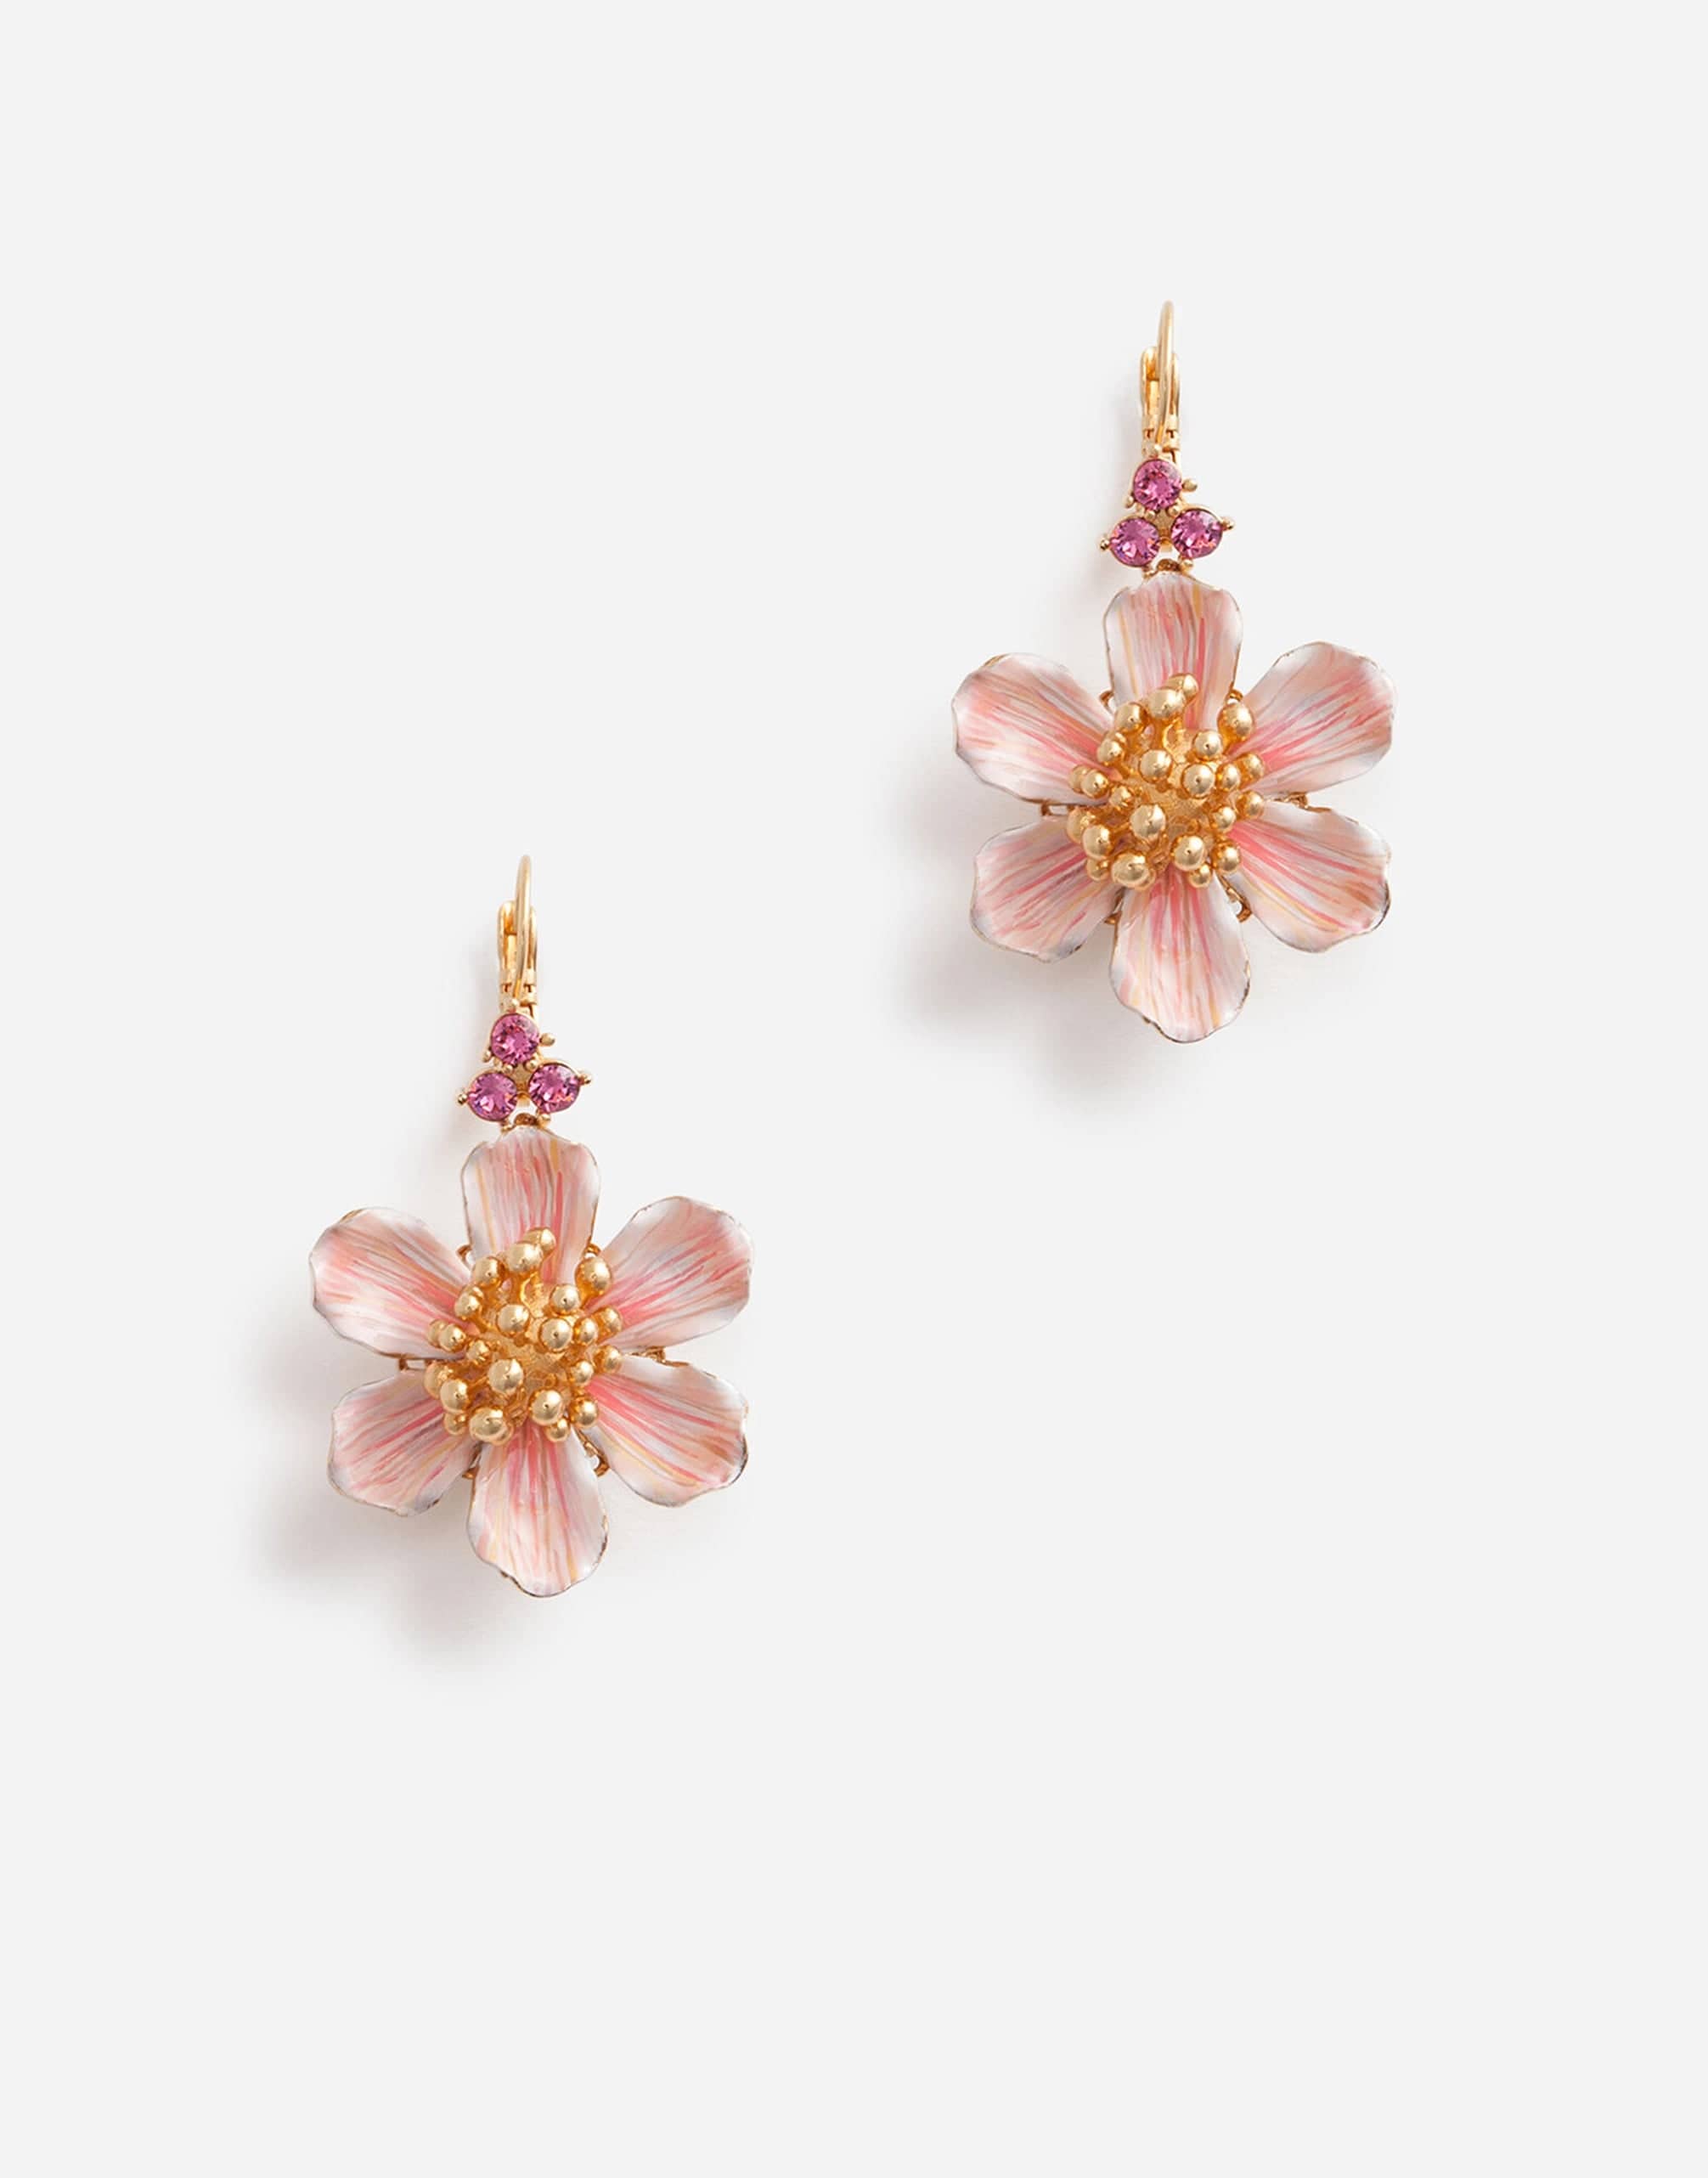 Dolce & Gabbana Leverback Earrings With Hand-Painted Flower